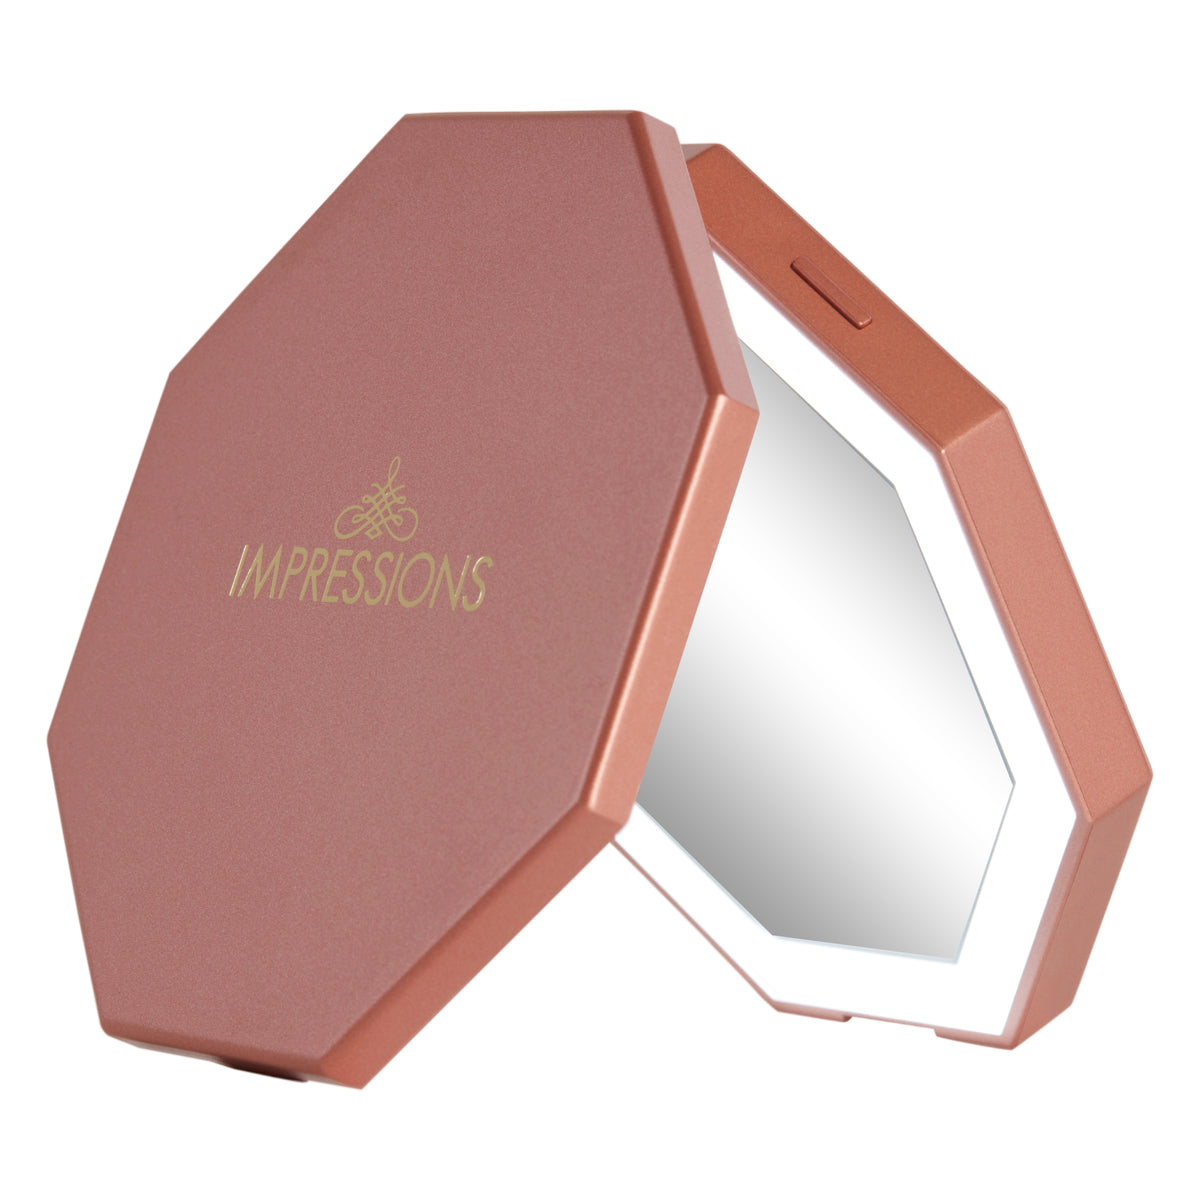 Lissom Design Compact Mirror - Handheld Magnifying Cosmetic Mirror, 3.5 x  2.63-Inch, Chocolate Delights